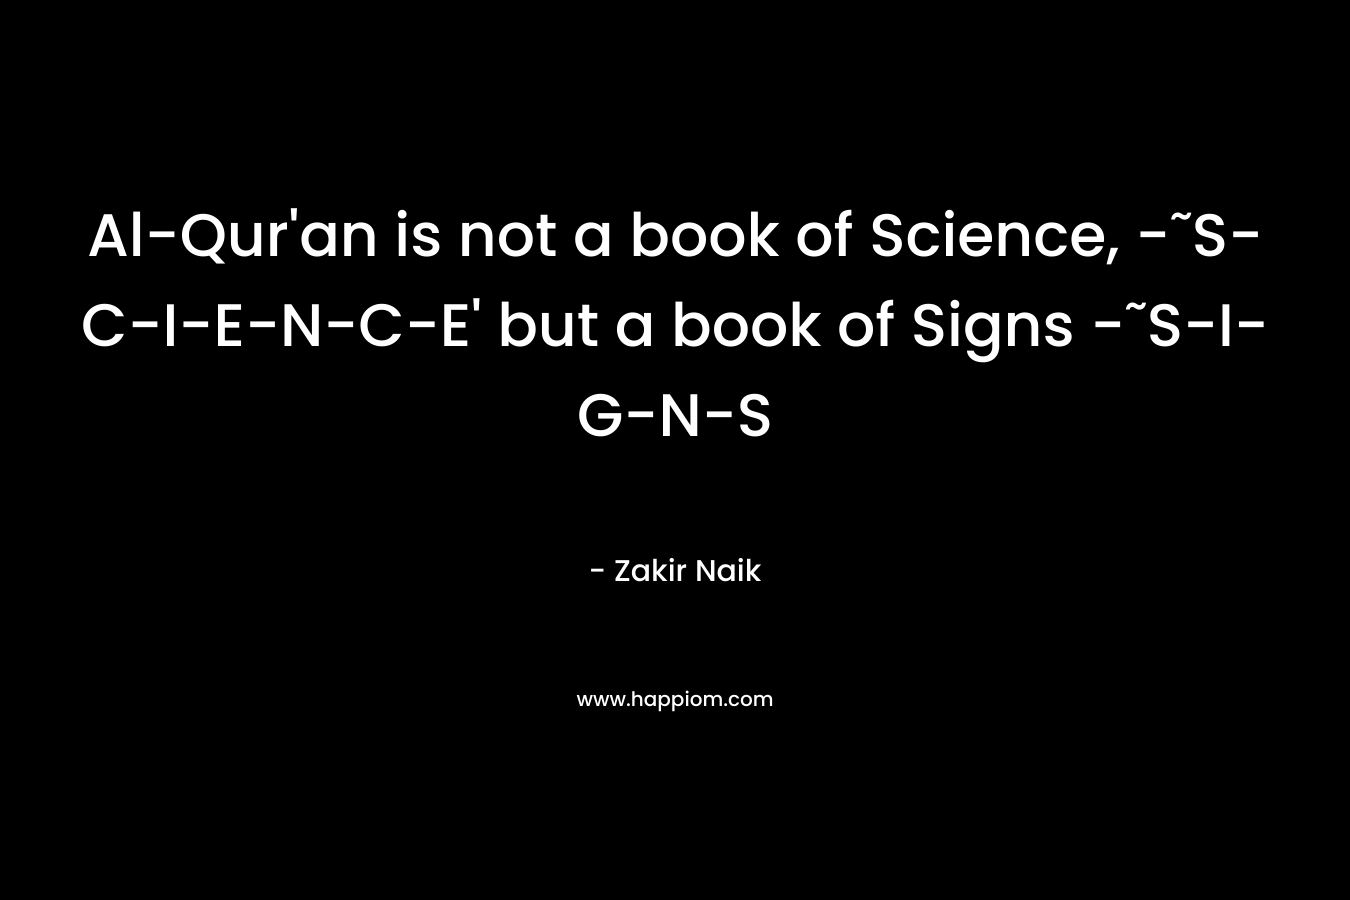 Al-Qur’an is not a book of Science, -˜S-C-I-E-N-C-E’ but a book of Signs -˜S-I-G-N-S – Zakir Naik